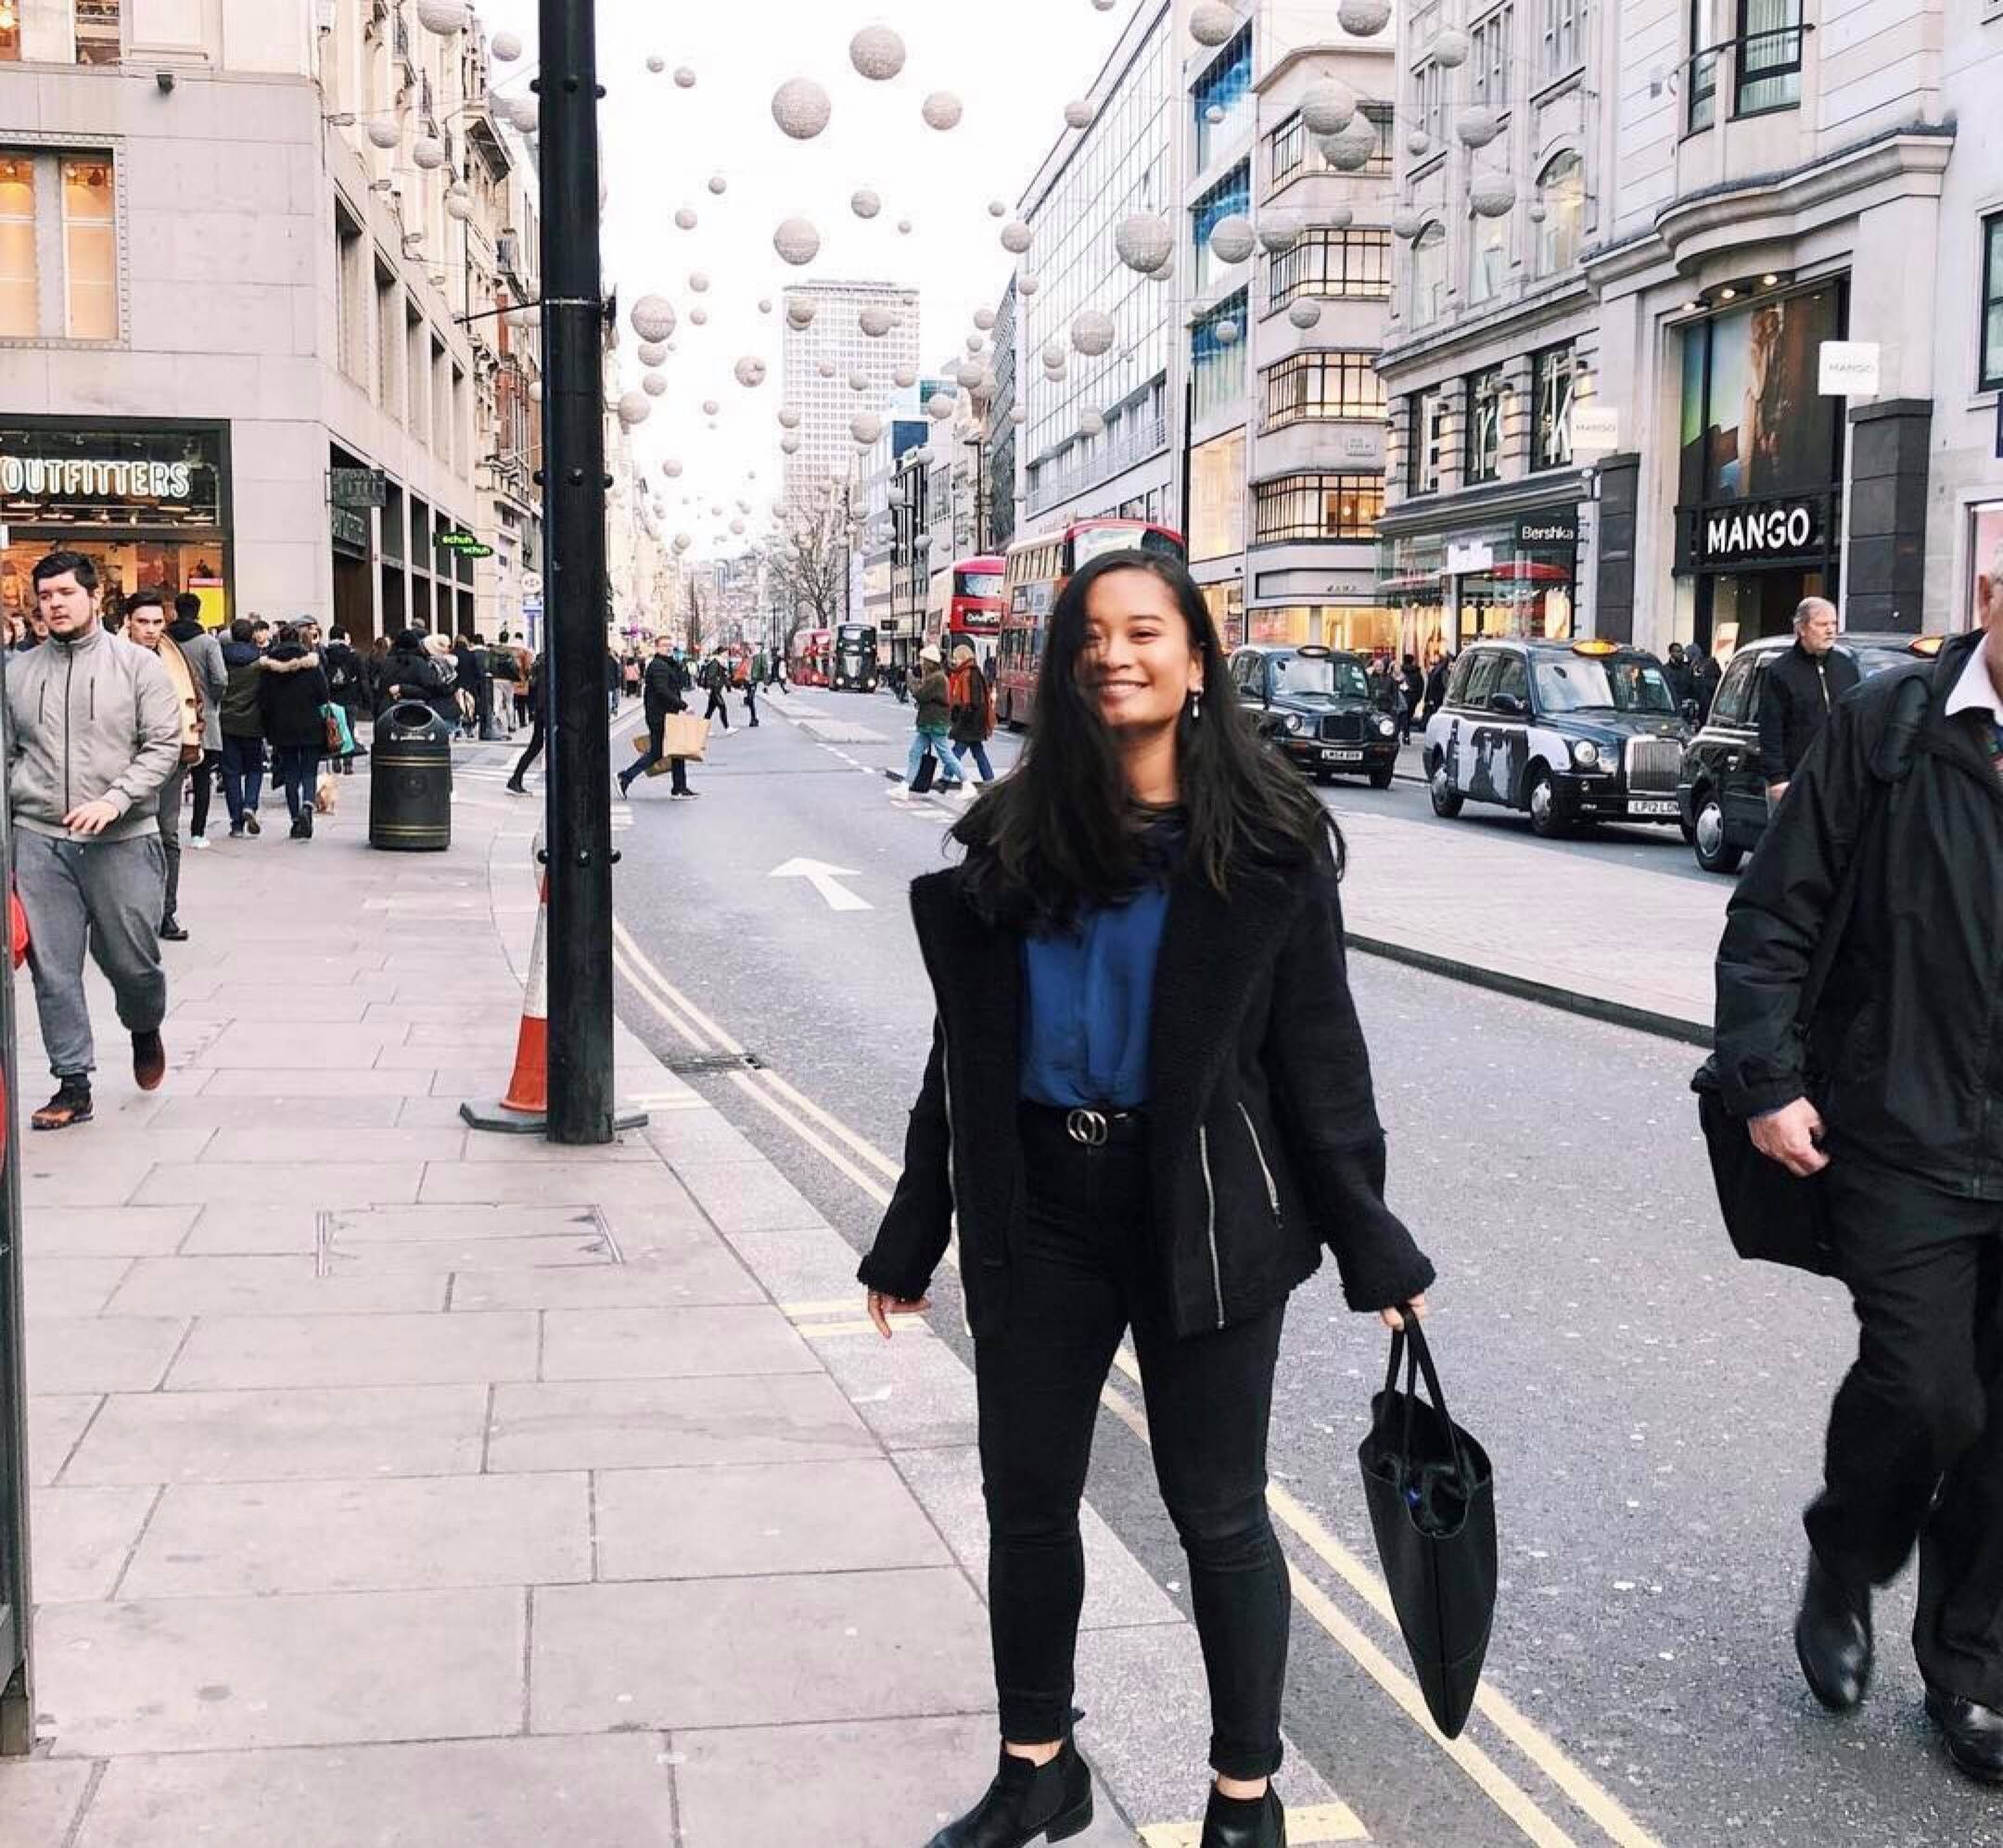 Study abroad student wearing black pants and jacket, smiling at the camera on a busy London street